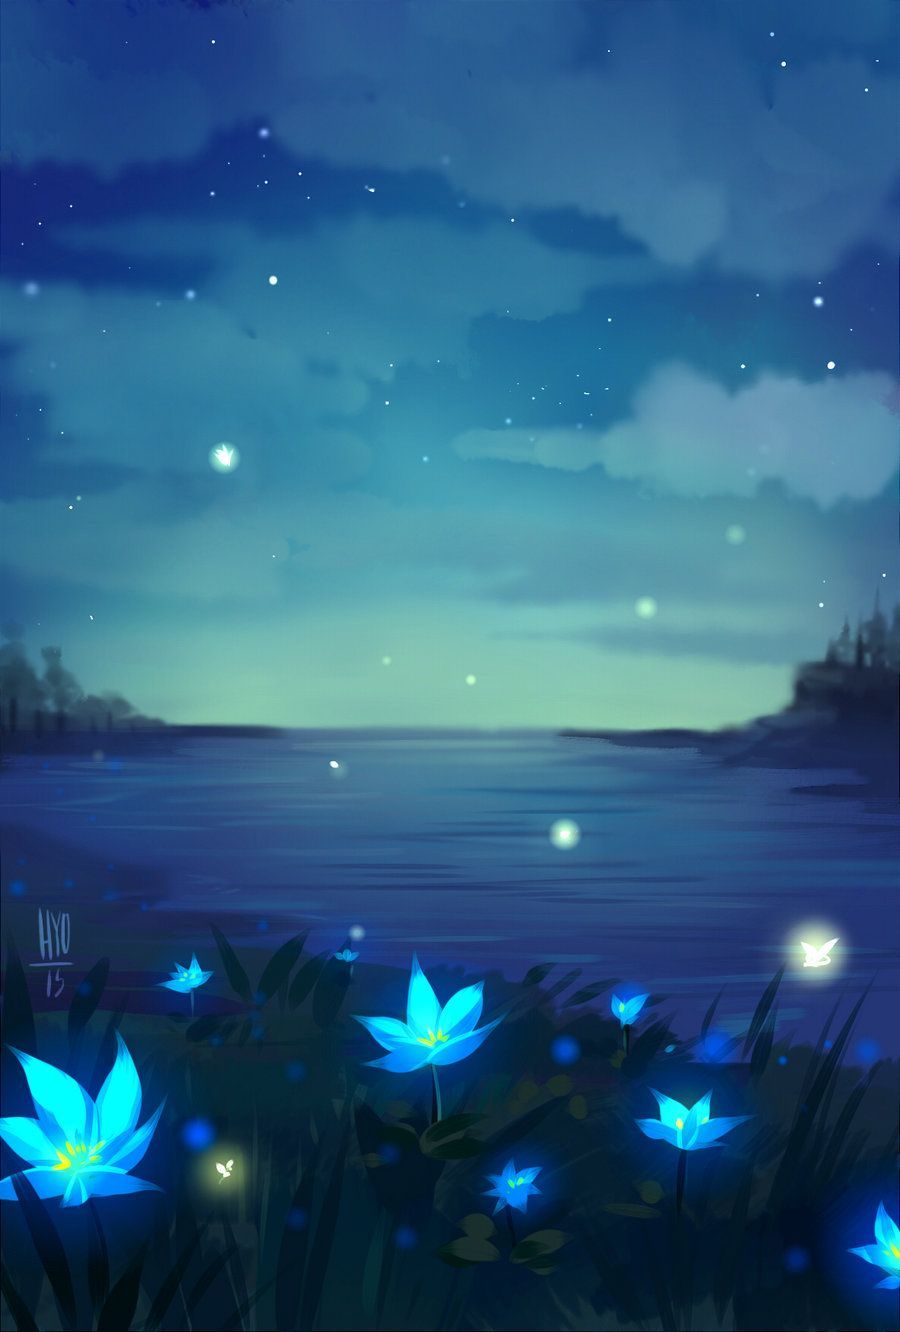 there are blue flowers on the shore. Beautiful wallpaper background, Blue flower wallpaper, Beautiful nature wallpaper